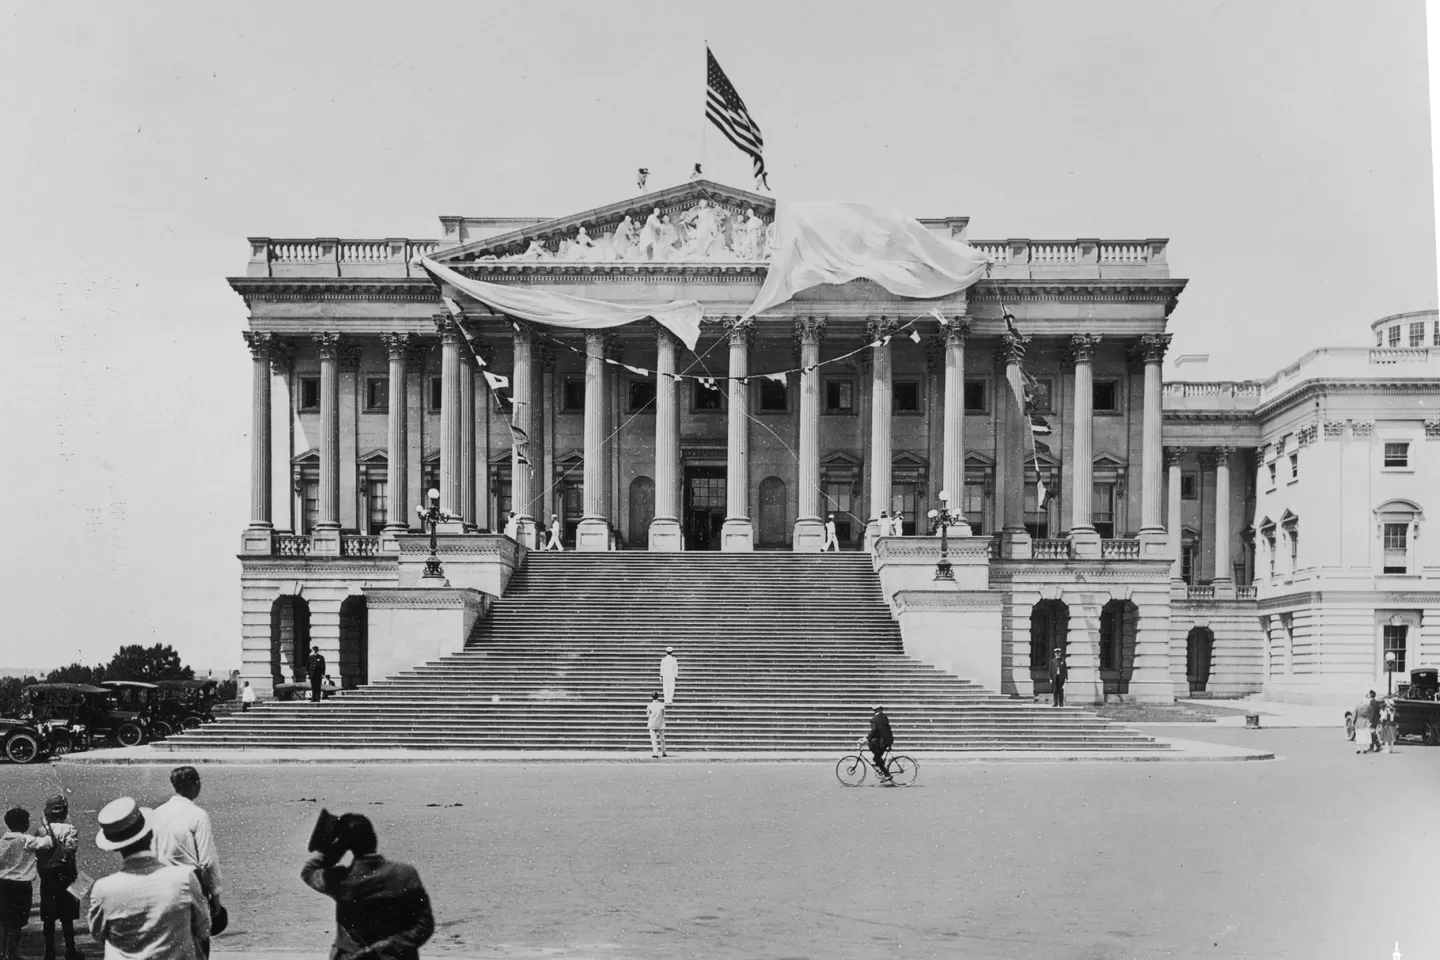 The Apotheosis of Democracy pediment during its unveiling on August 2, 1916.